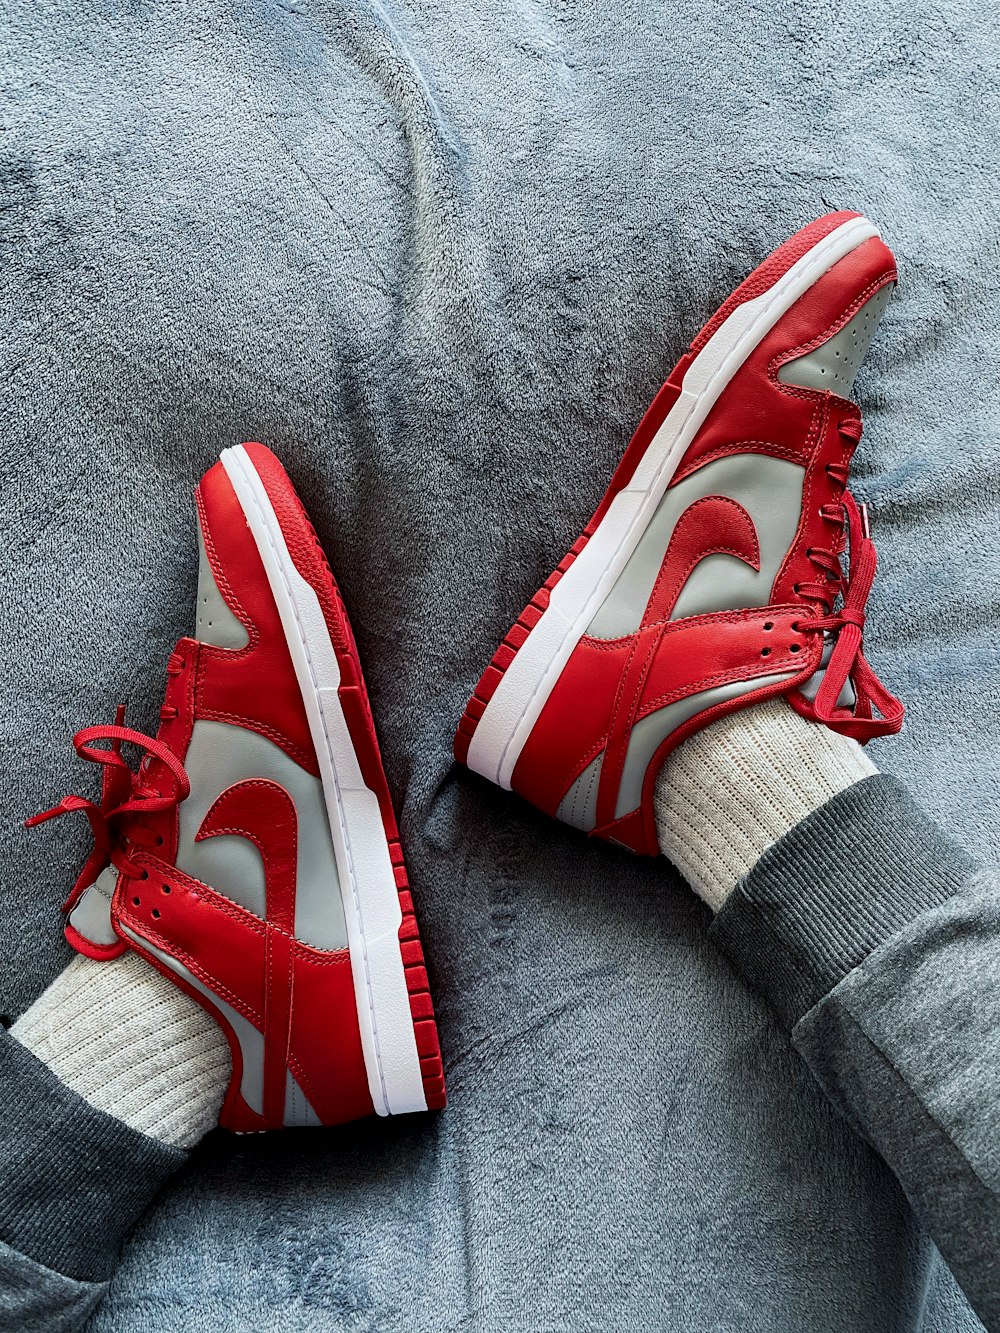 person wearing red and white nike sneakers